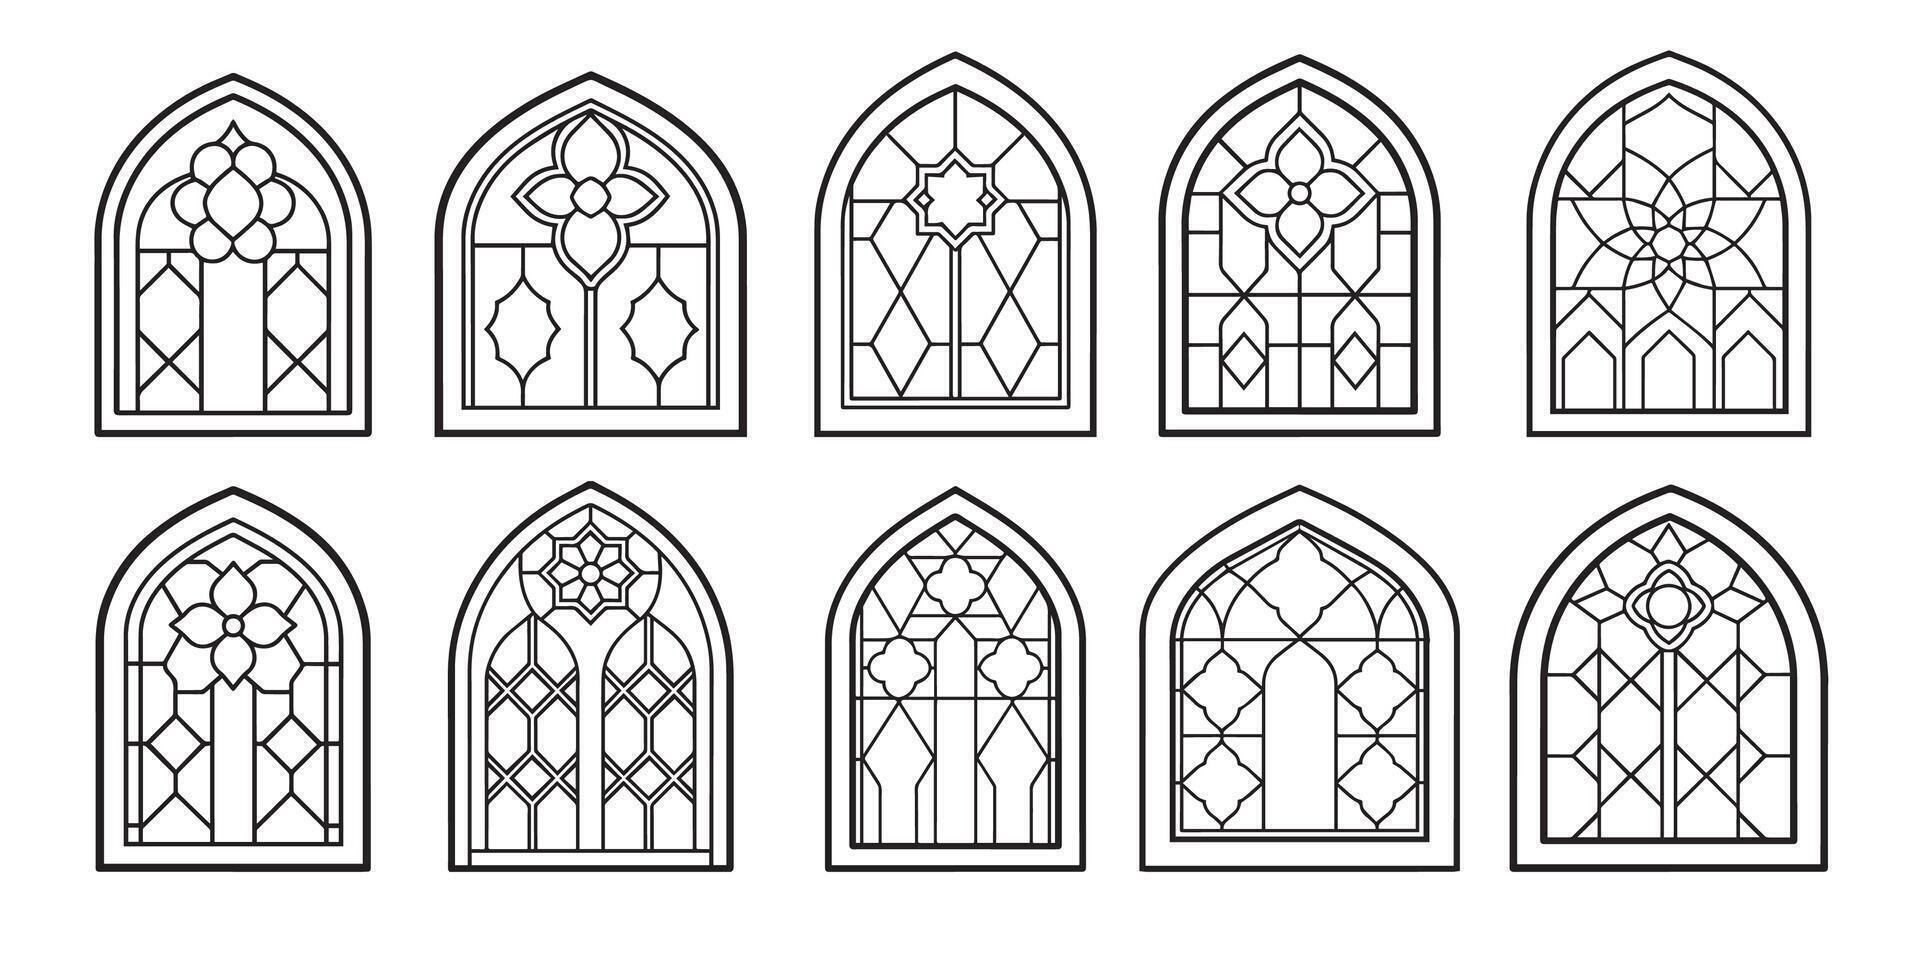 set of cartoon stained glass windows for the design of children's books, coloring books vector